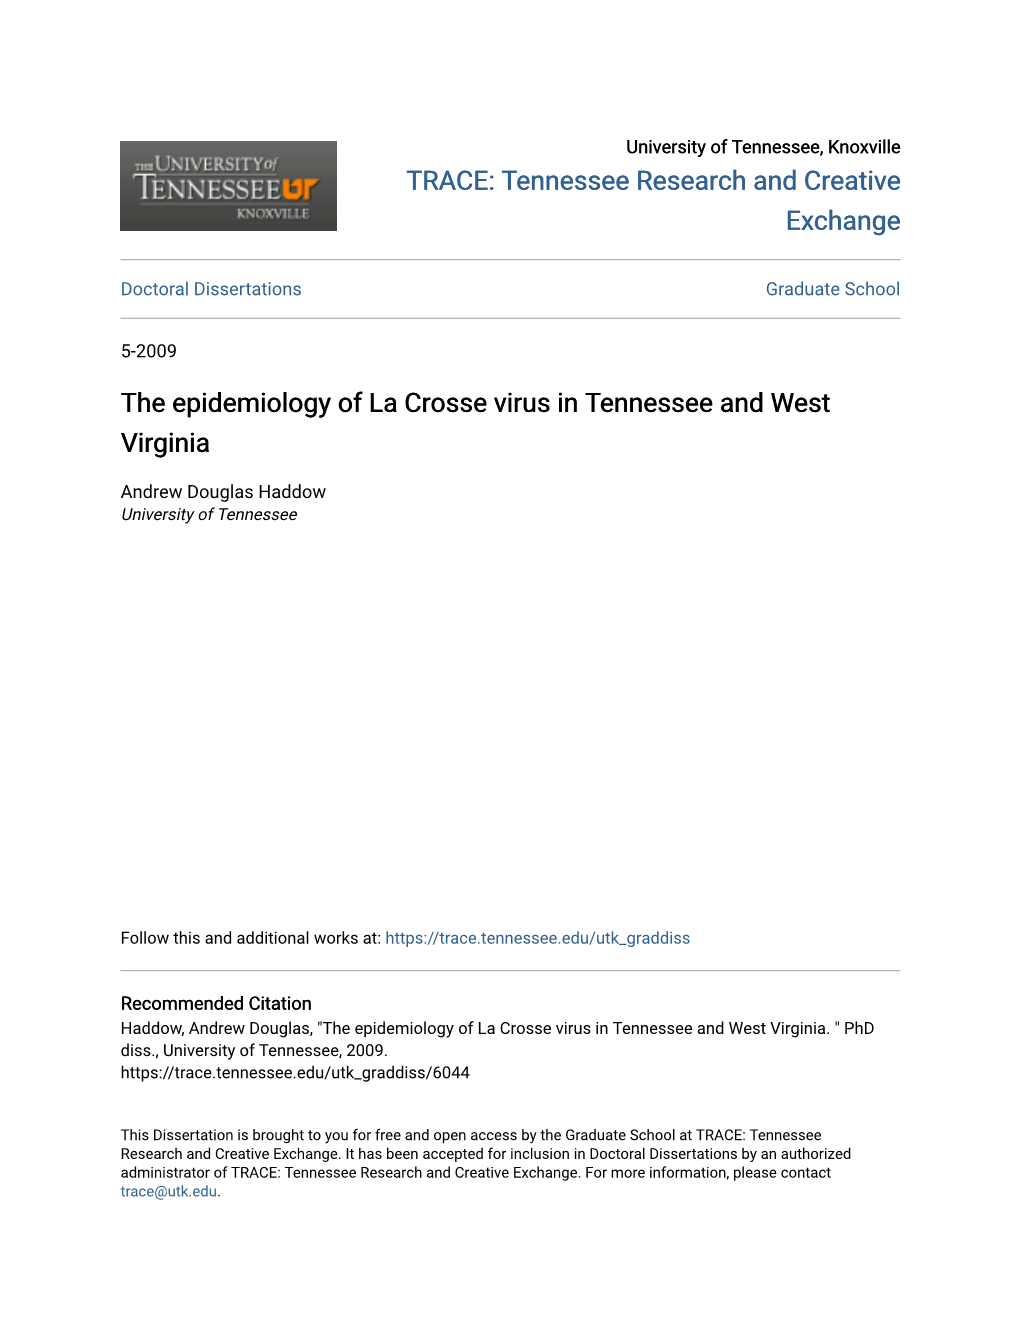 The Epidemiology of La Crosse Virus in Tennessee and West Virginia